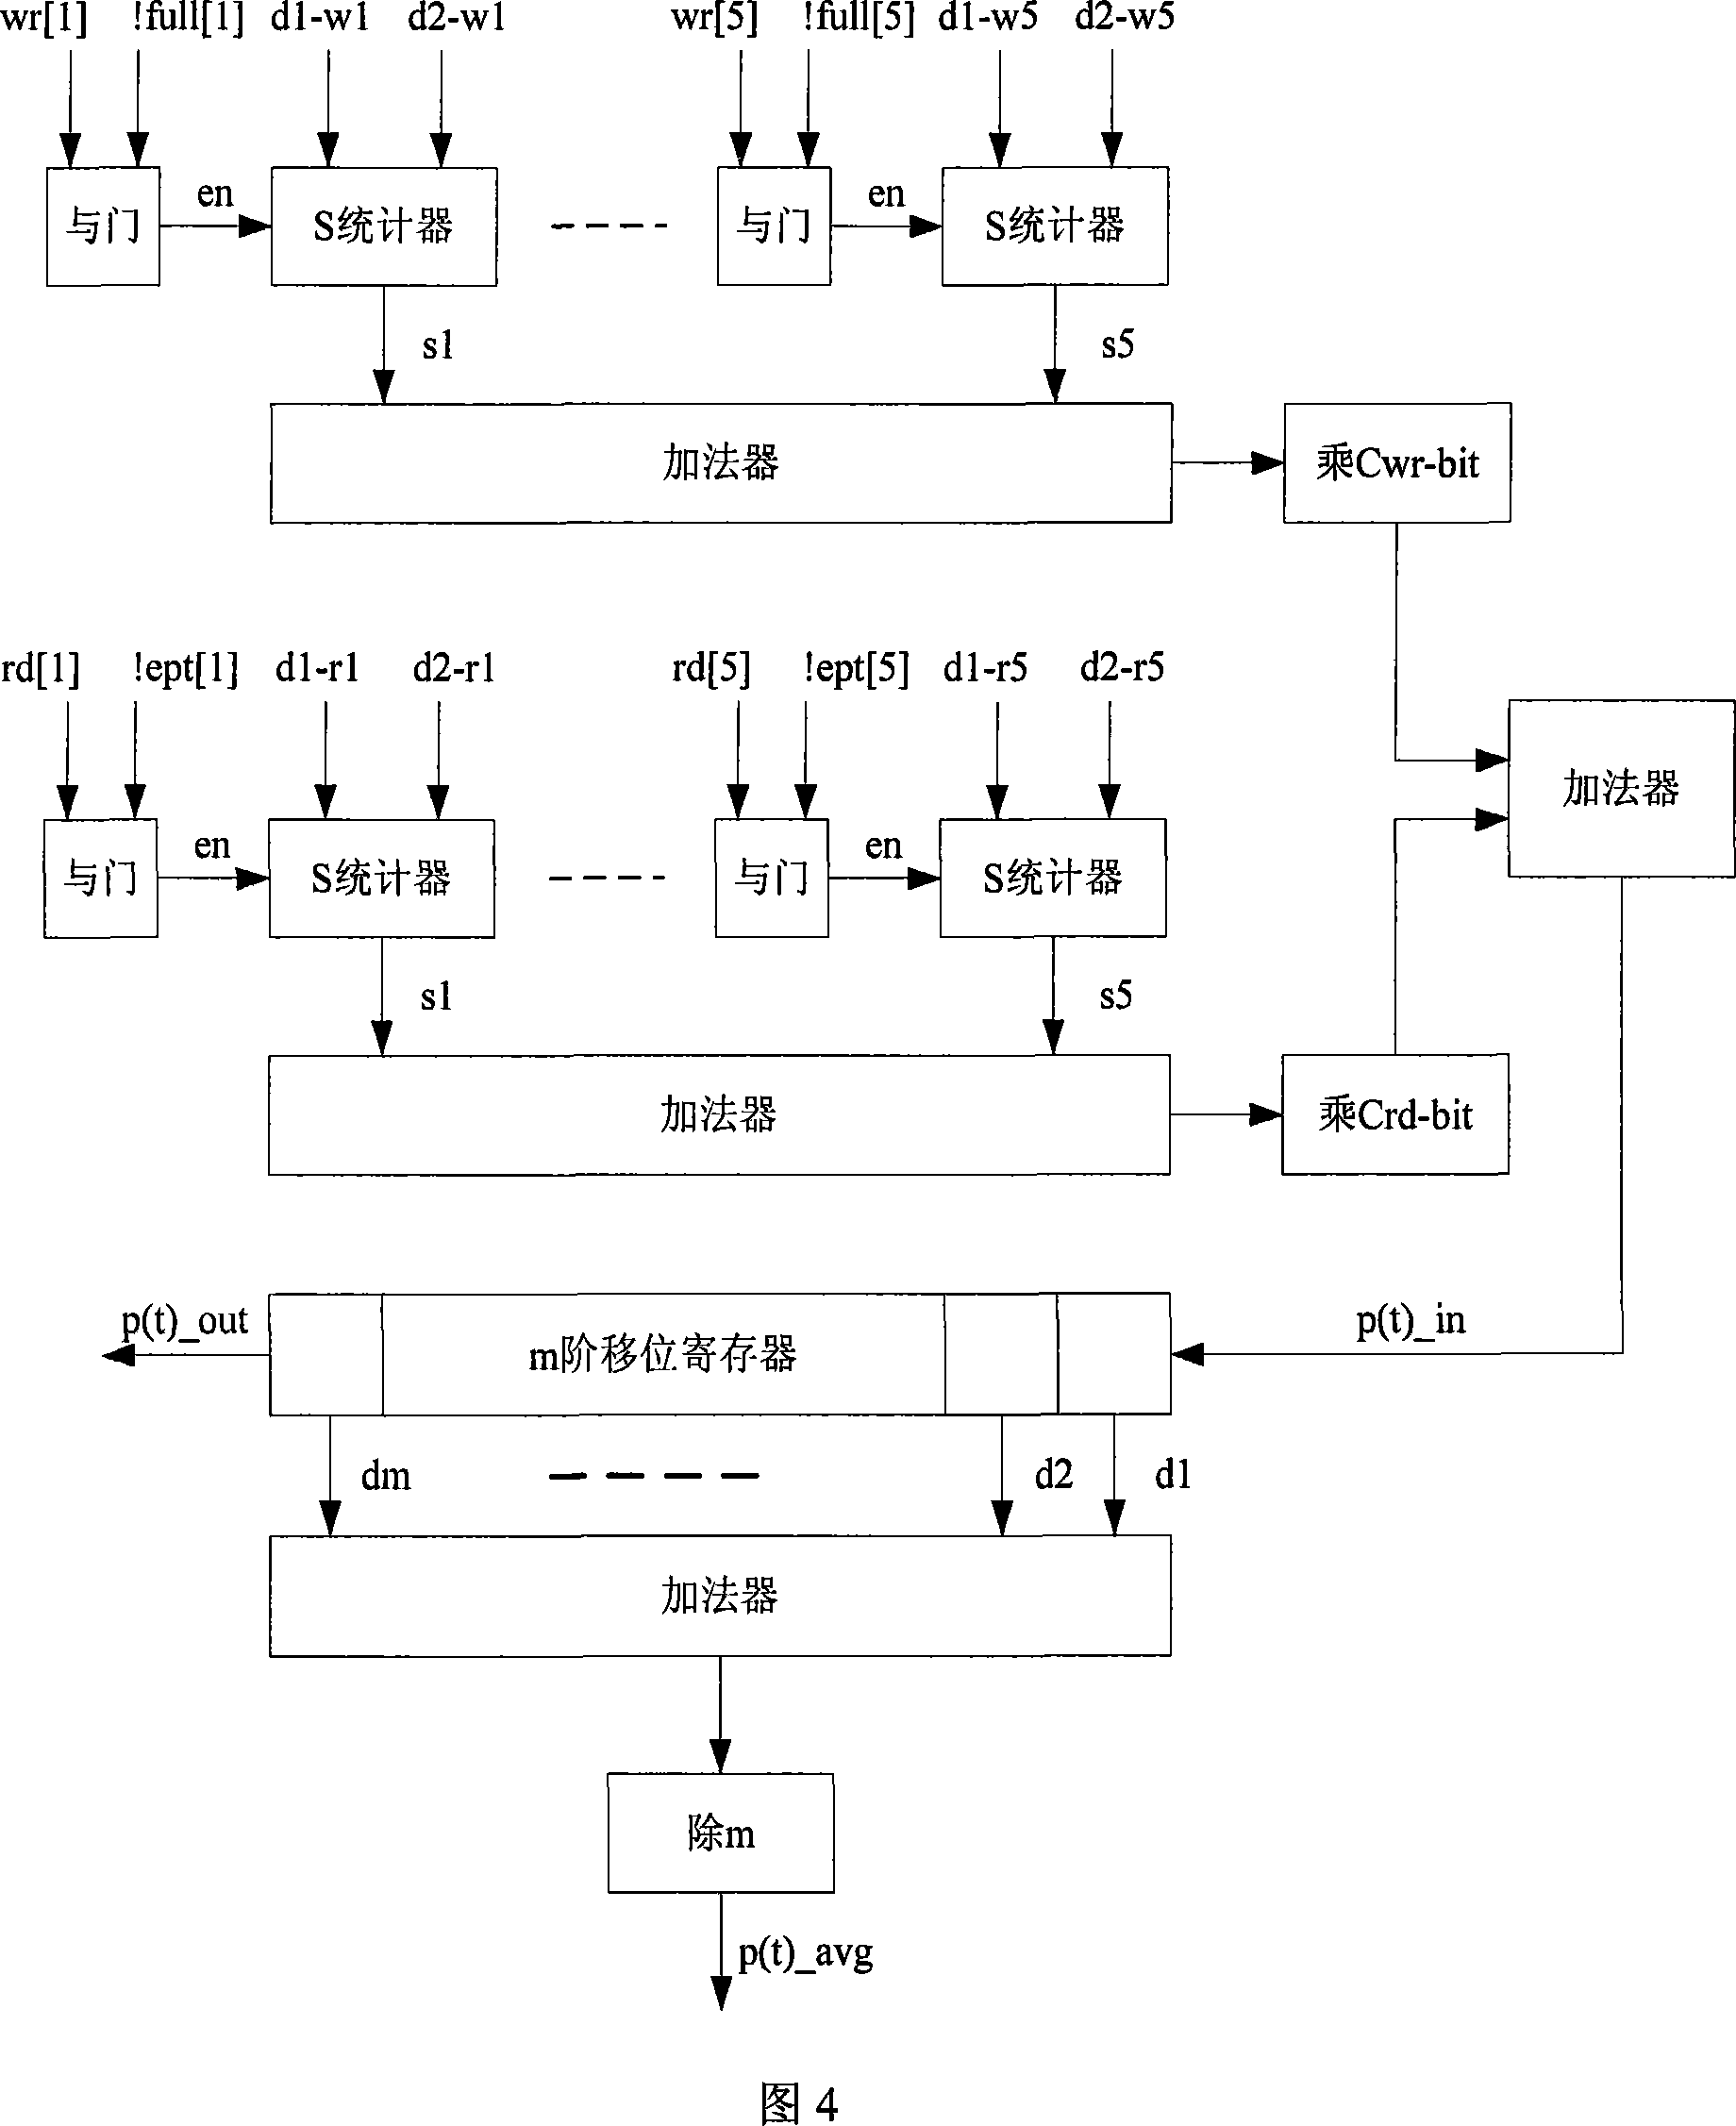 Router power consumption model based on network on chip